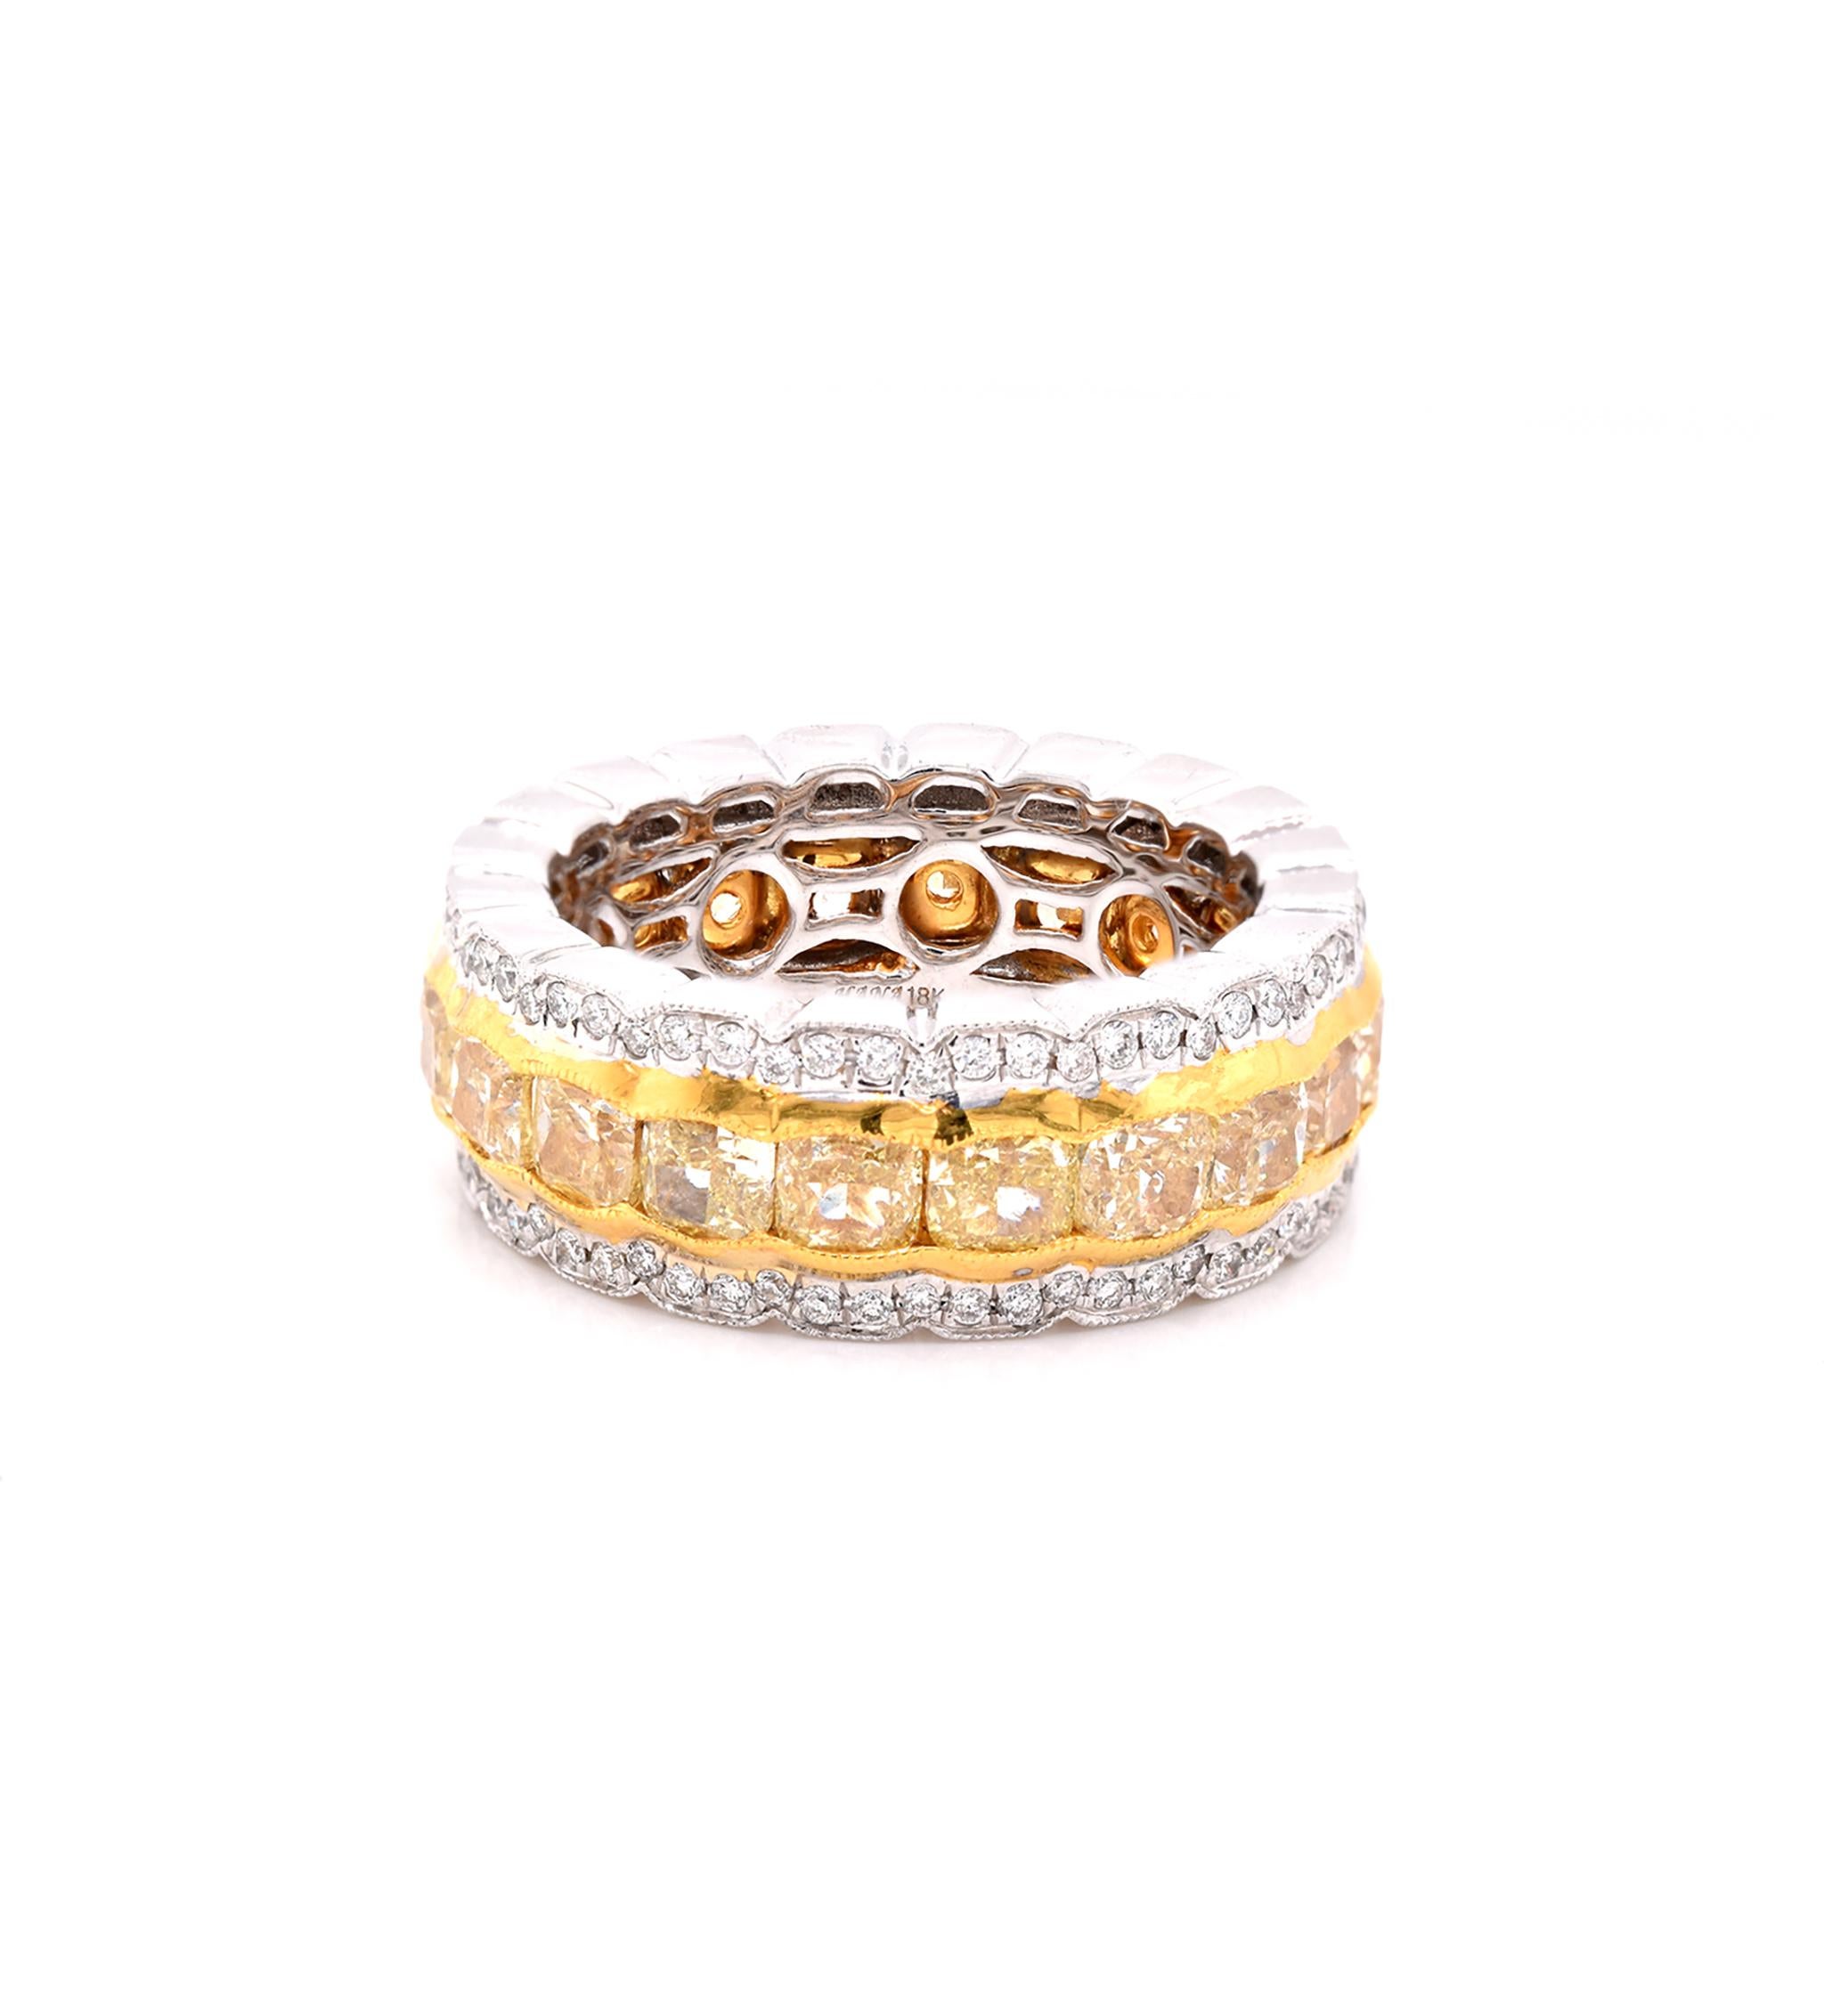 Material: 18K white and yellow gold
Diamonds: 120 round cut = 0.54cttw
Color: G
Clarity: VS
Diamonds: 20 cushion cut = 5.50cttw
Color: Fancy Yellow
Clarity: VS
Ring Size: 6 3/4 (Please allow up to two additional business days for sizing